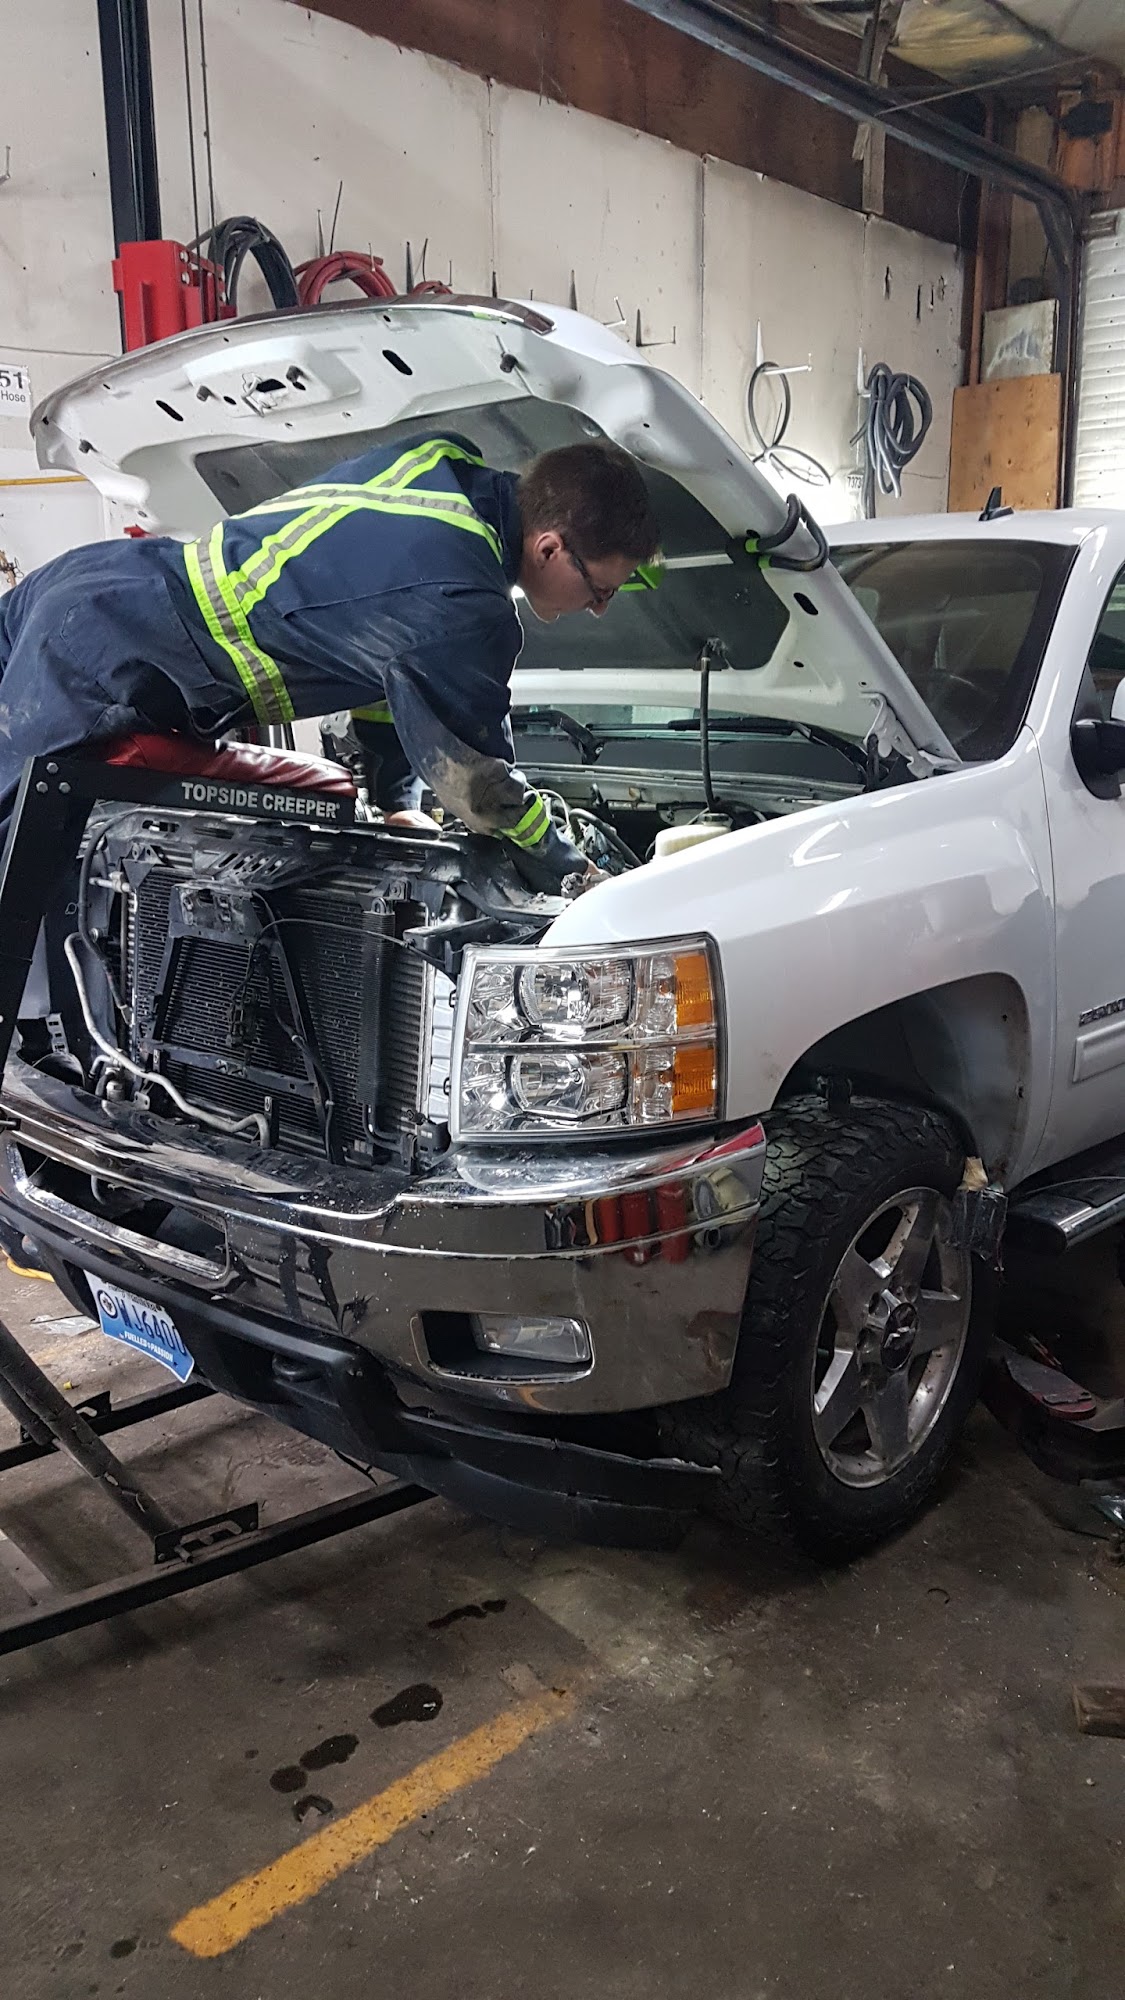 Selkirk Diesel Repair & AutoCare Centre 126 Lily Ave, Selkirk Manitoba R1A 2A7